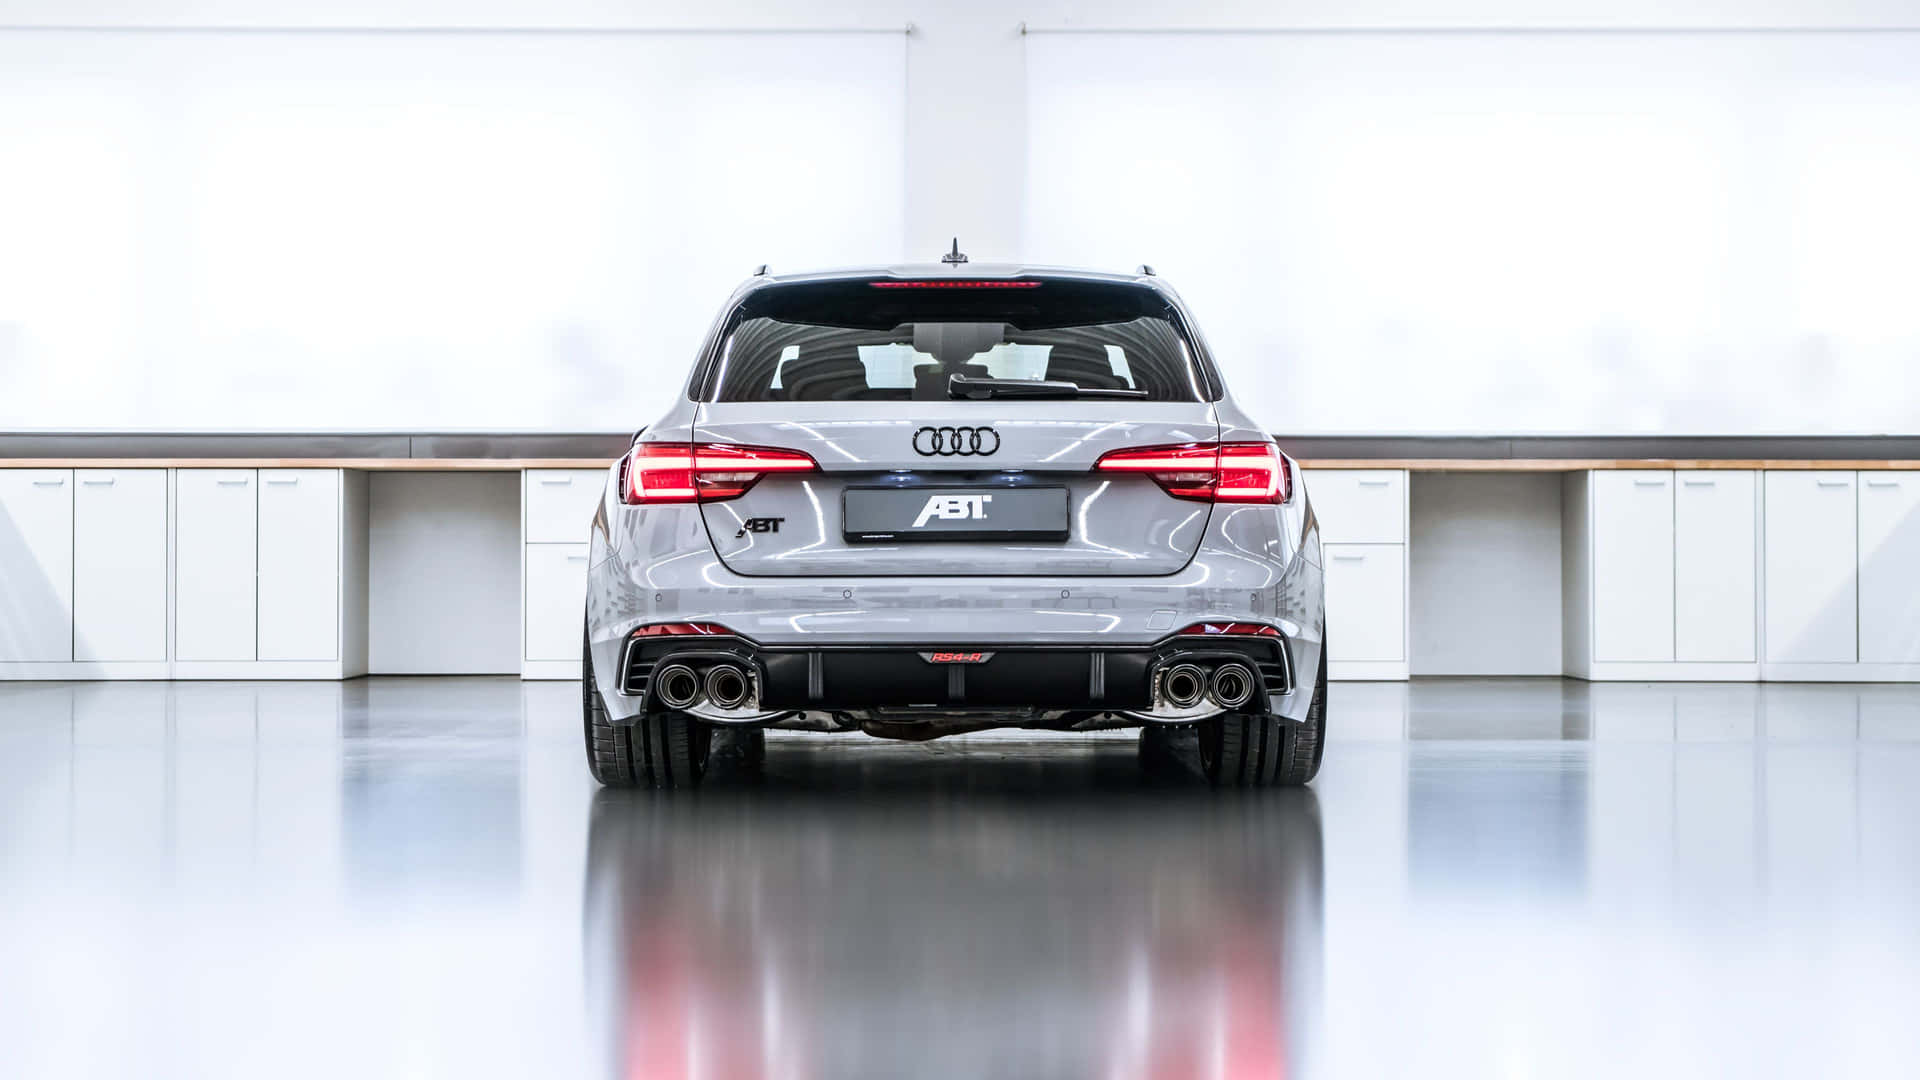 Sleek and Powerful Audi RS4 in Action Wallpaper